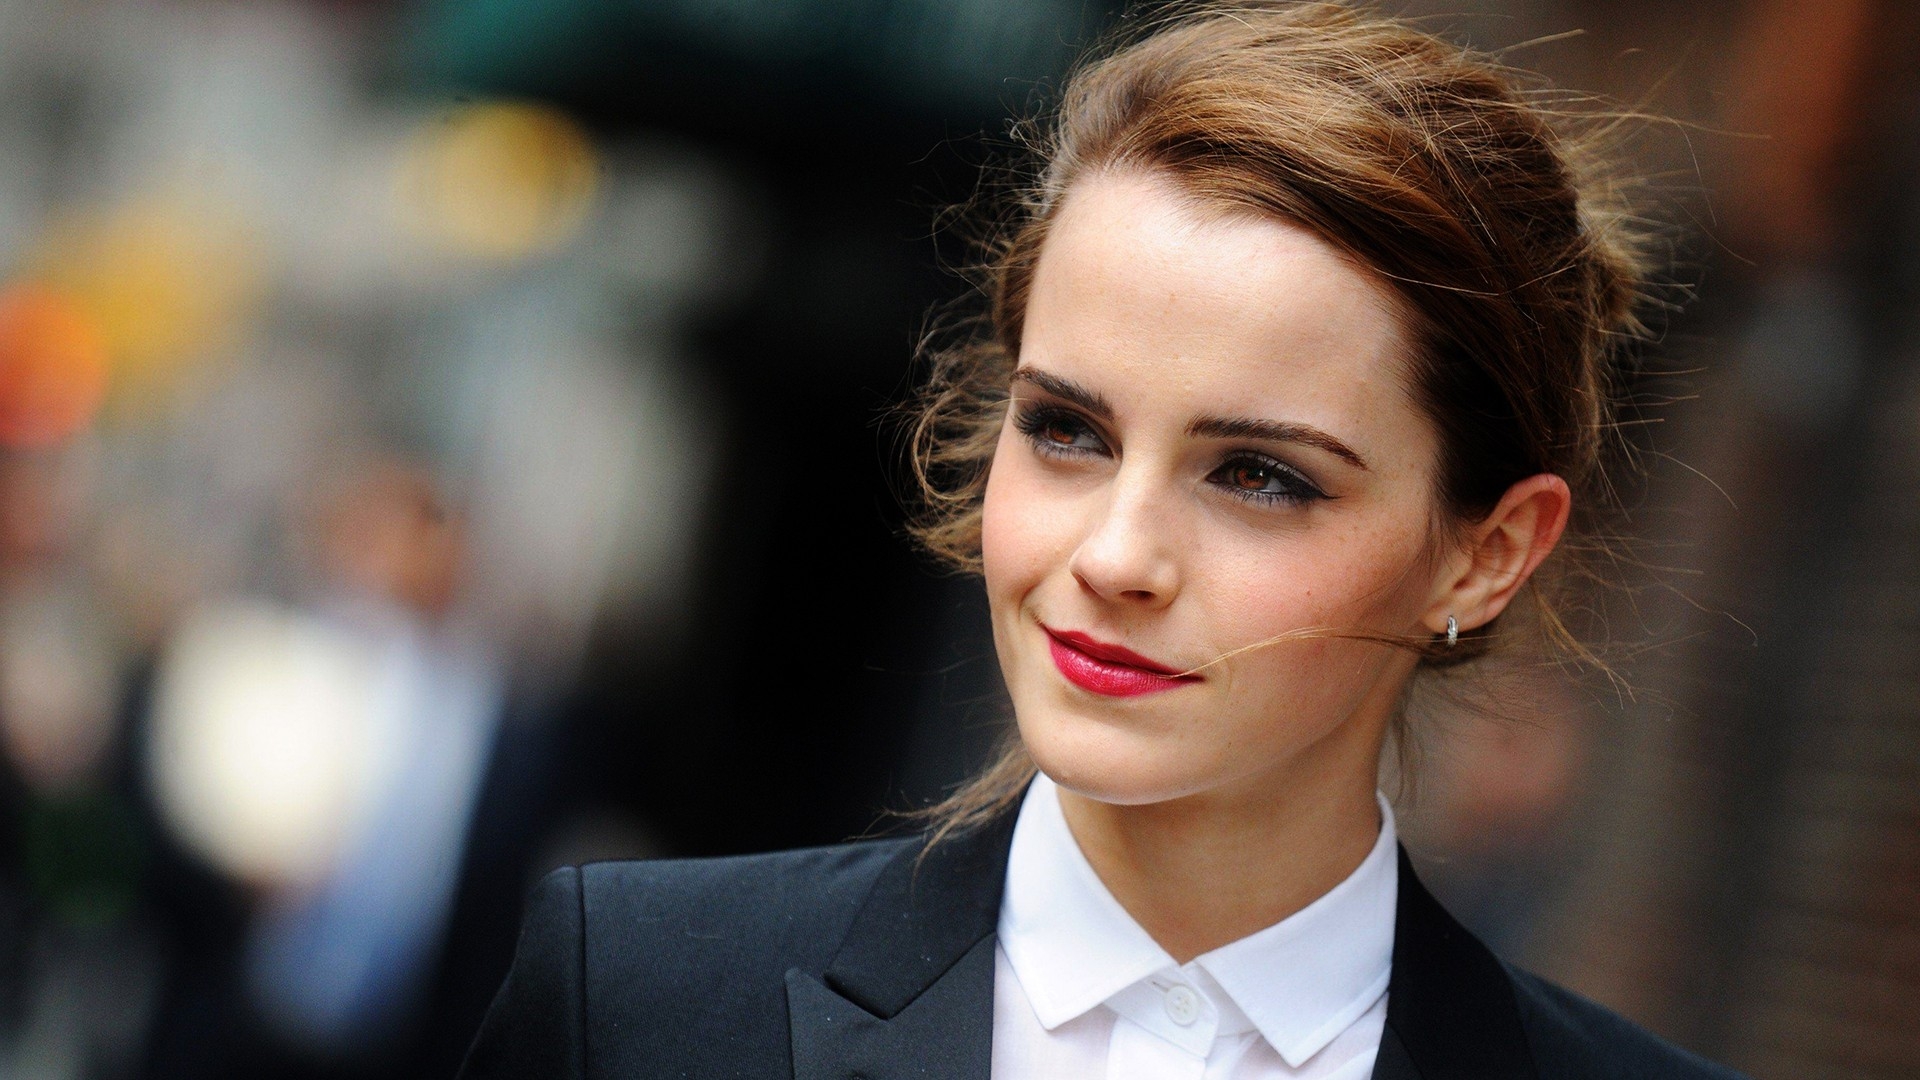 Emma Watson smiles with red lipstick on her lips